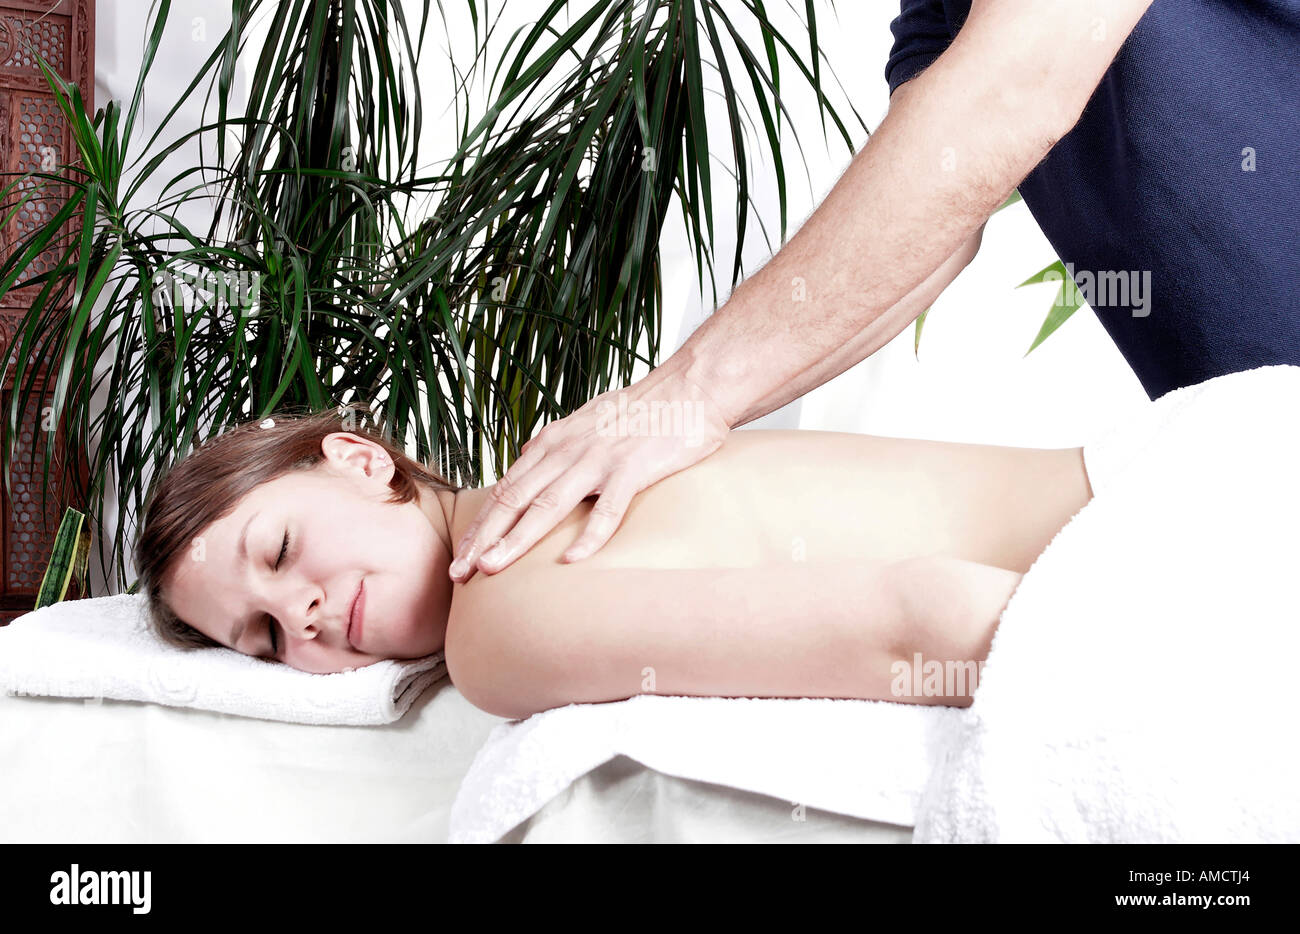 Young woman having back massage by man Stock Photo